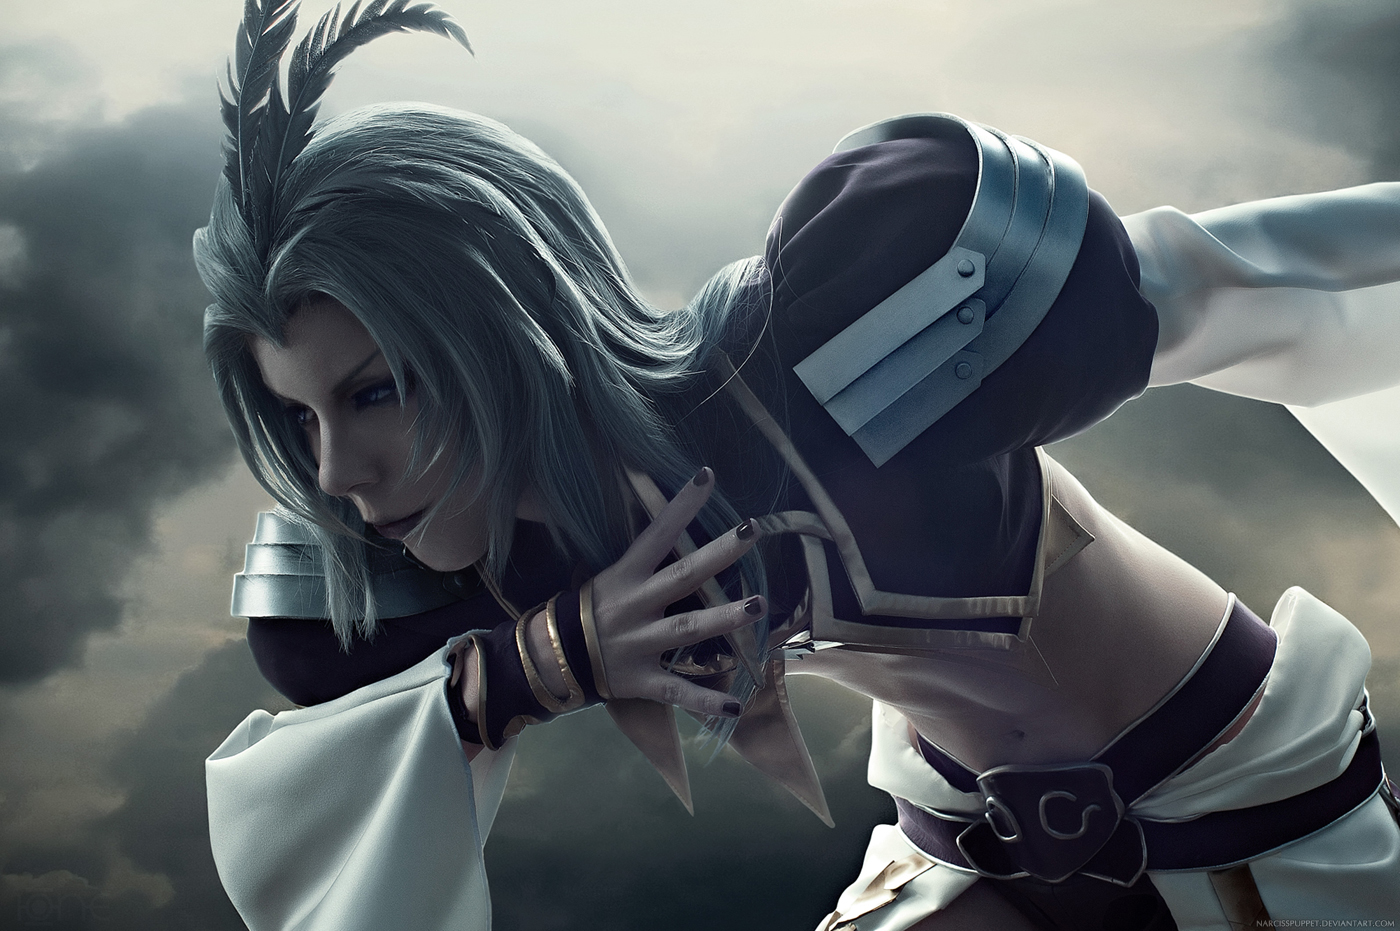 kuja___final_fantasy_dissidia___angel_of_death_by_narcisspuppet-d6sck3g.jpg